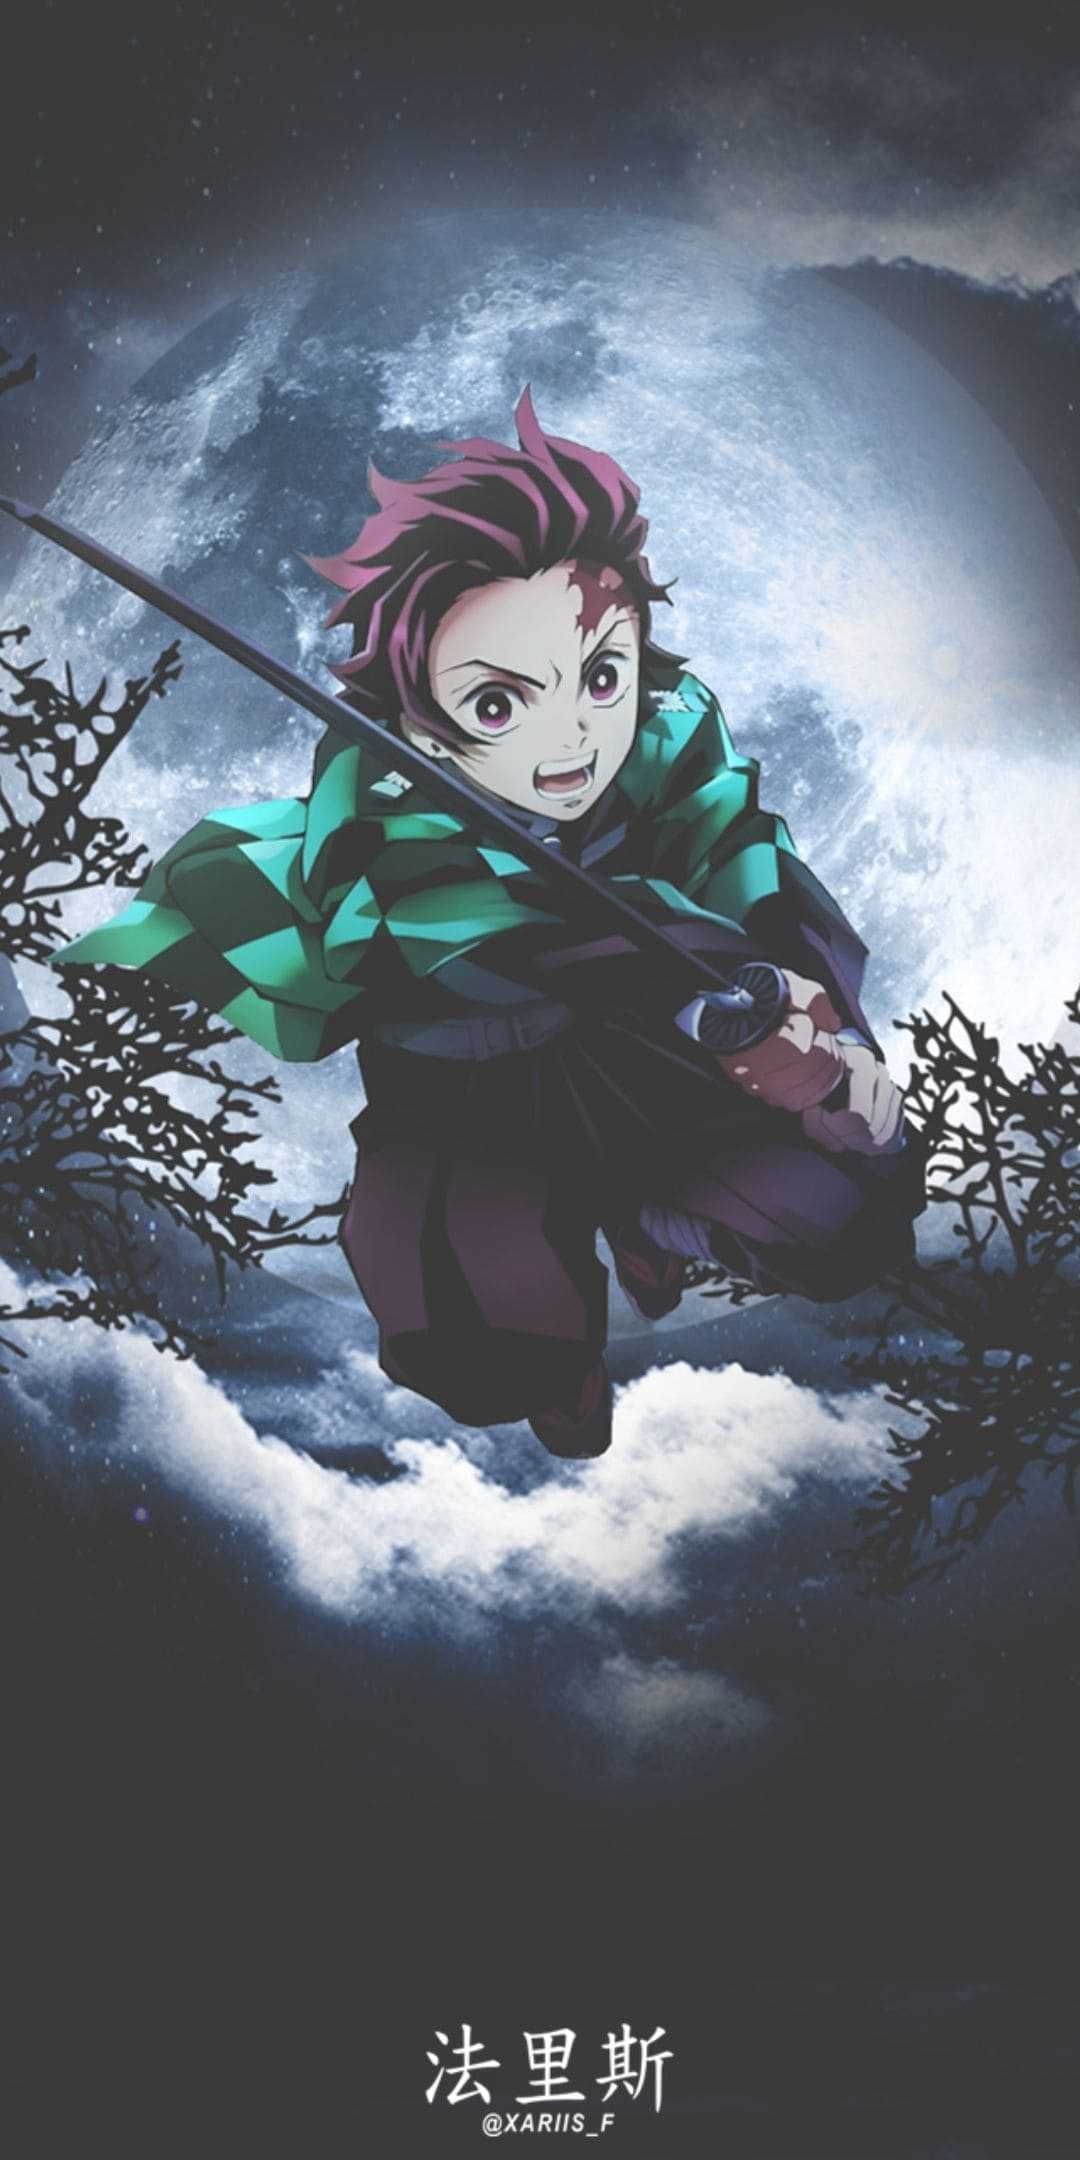 1080x1920 anime phone wallpaper of Tanjiro from Demon Slayer with a sword and full moon background - Tanjiro Kamado